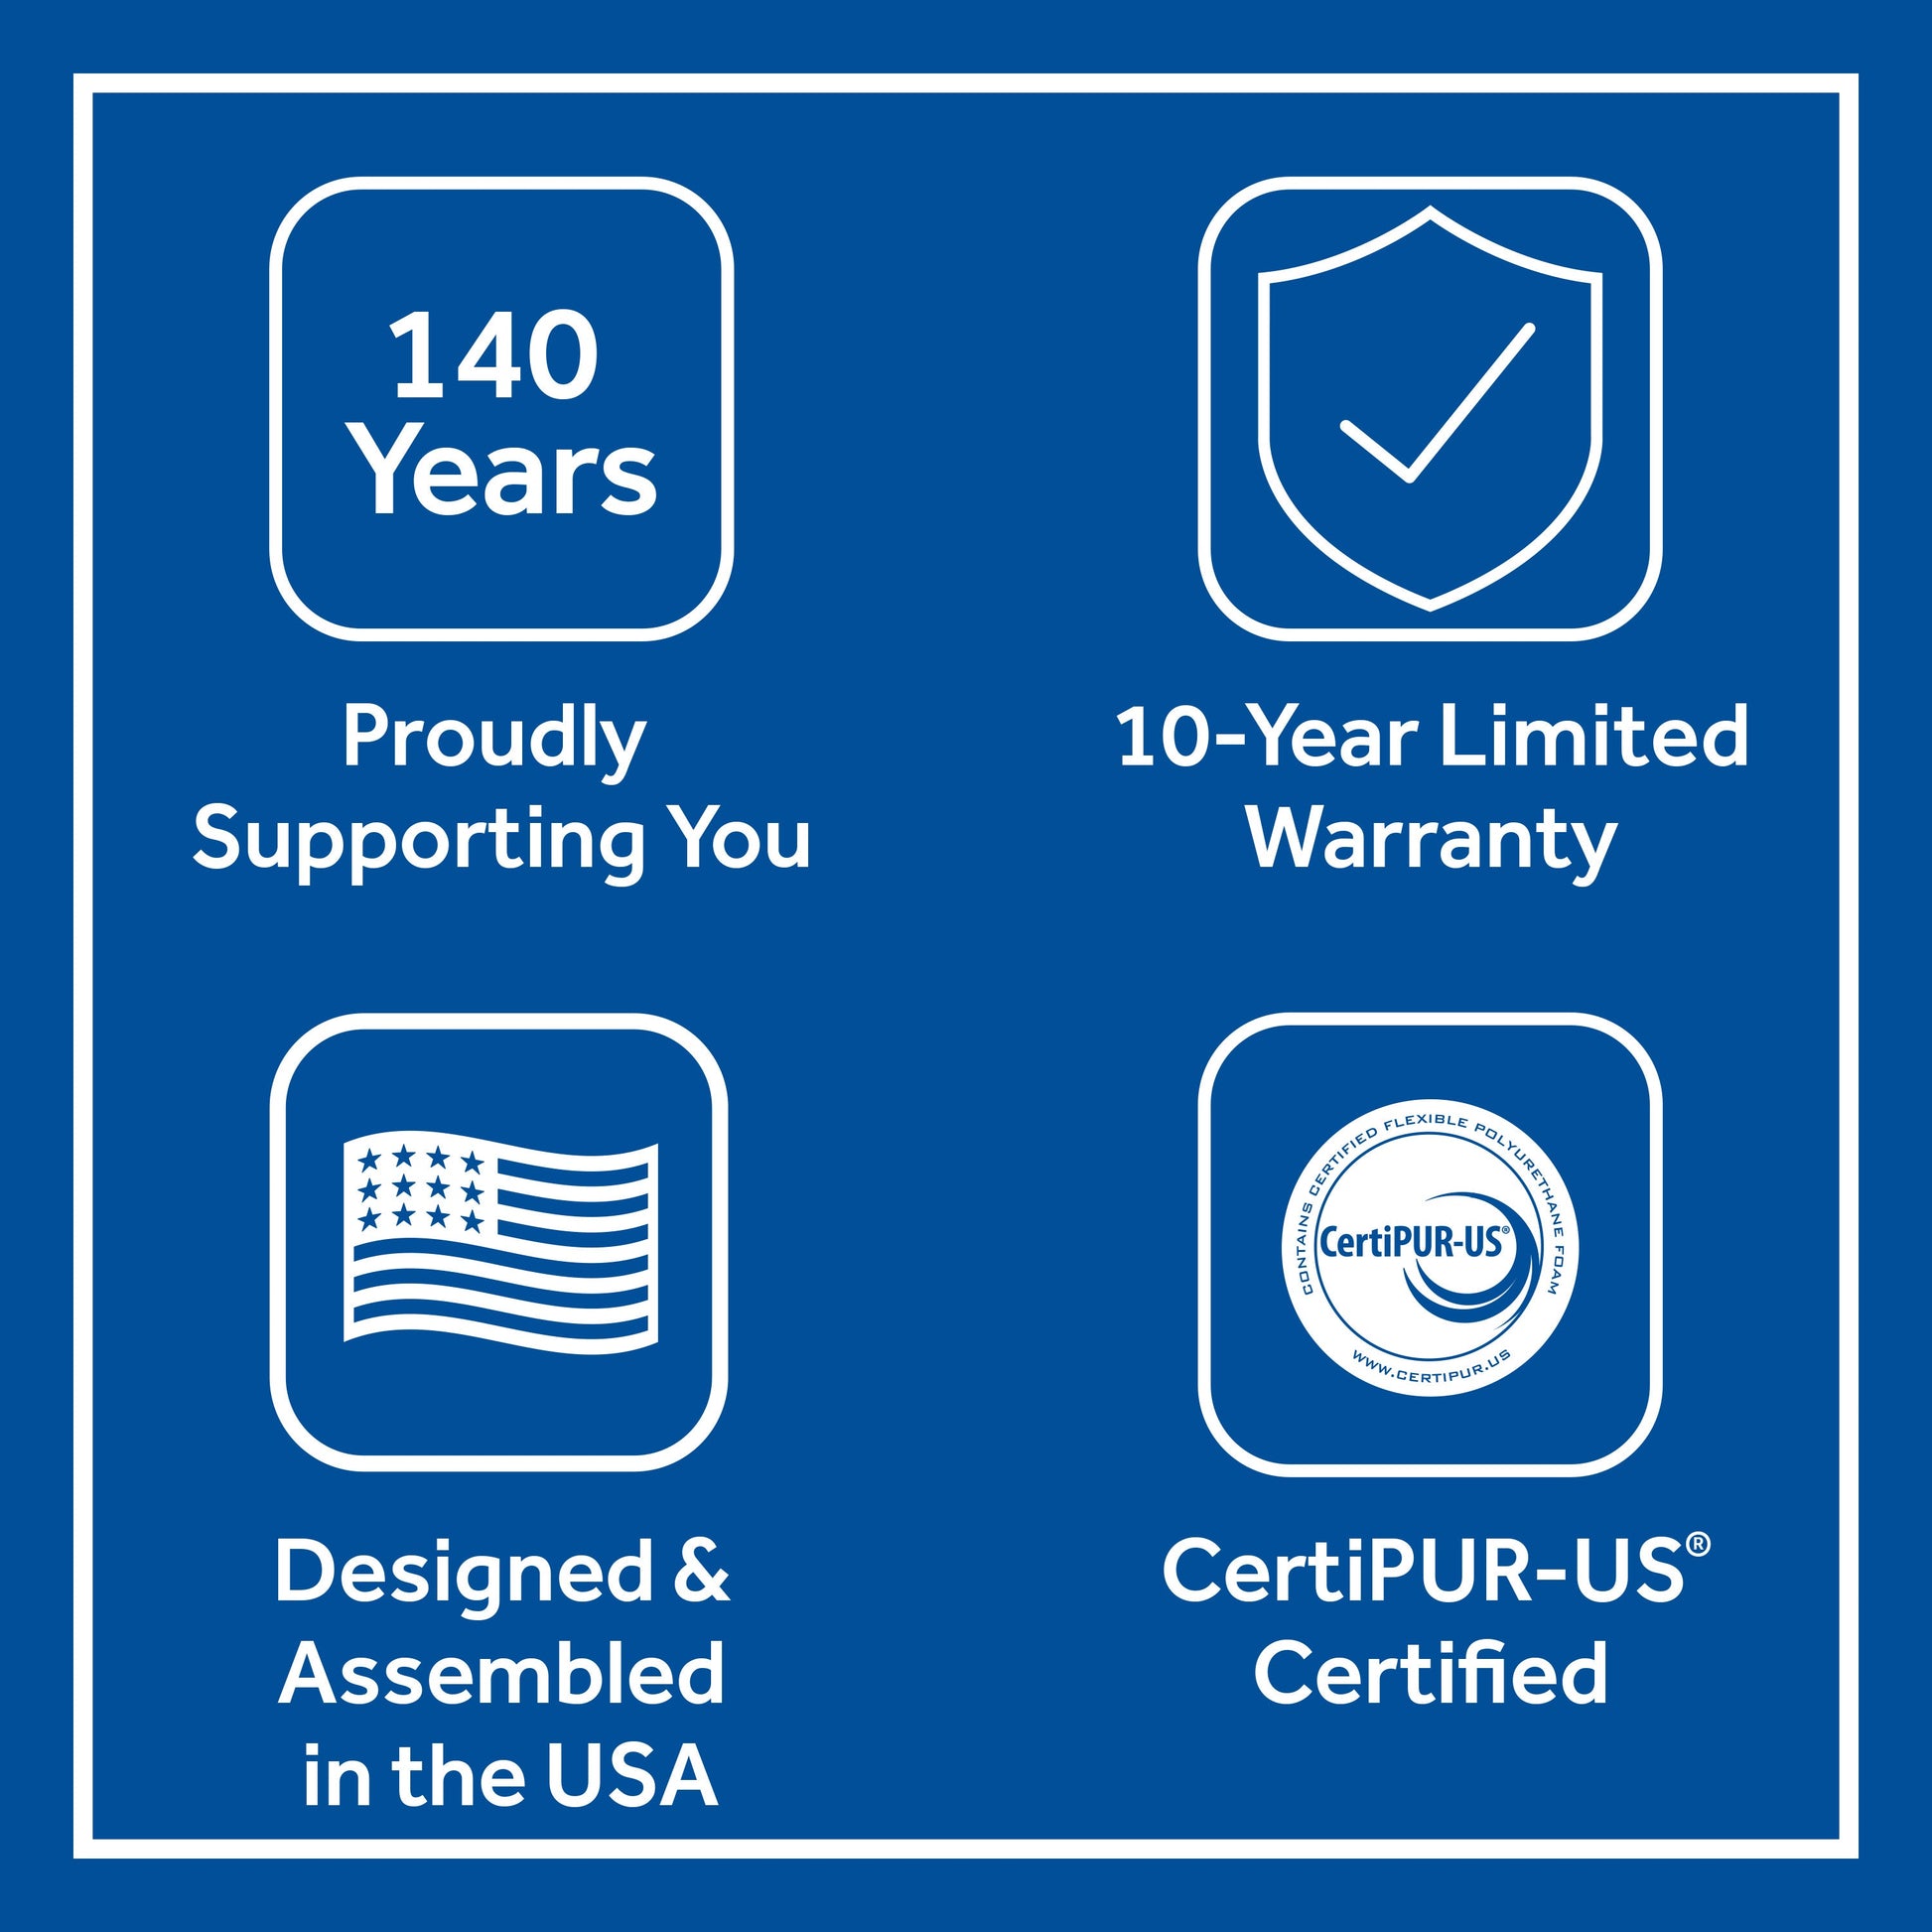 Sealy Brenham Soft Mattress Features; Proudly supporting you, 10 year limited warranty, designed and assembled in the USA, CertiPUR-US Certified